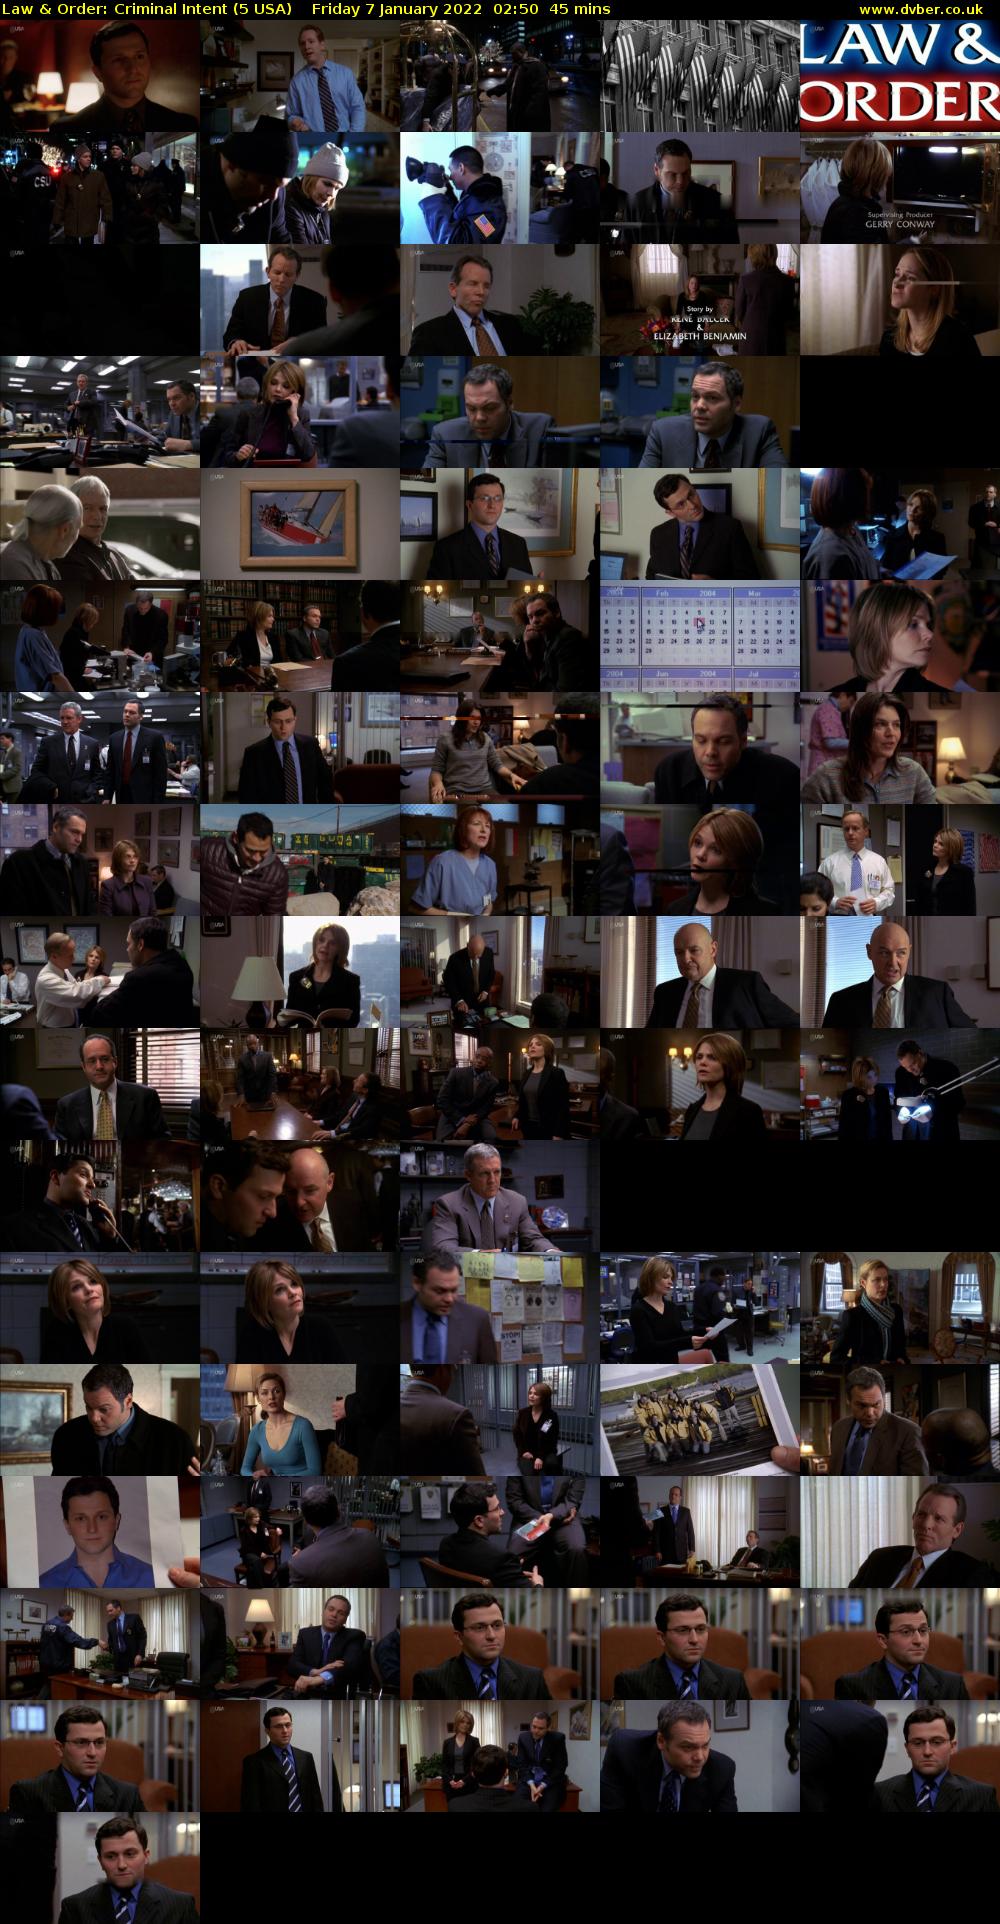 Law & Order: Criminal Intent (5 USA) Friday 7 January 2022 02:50 - 03:35